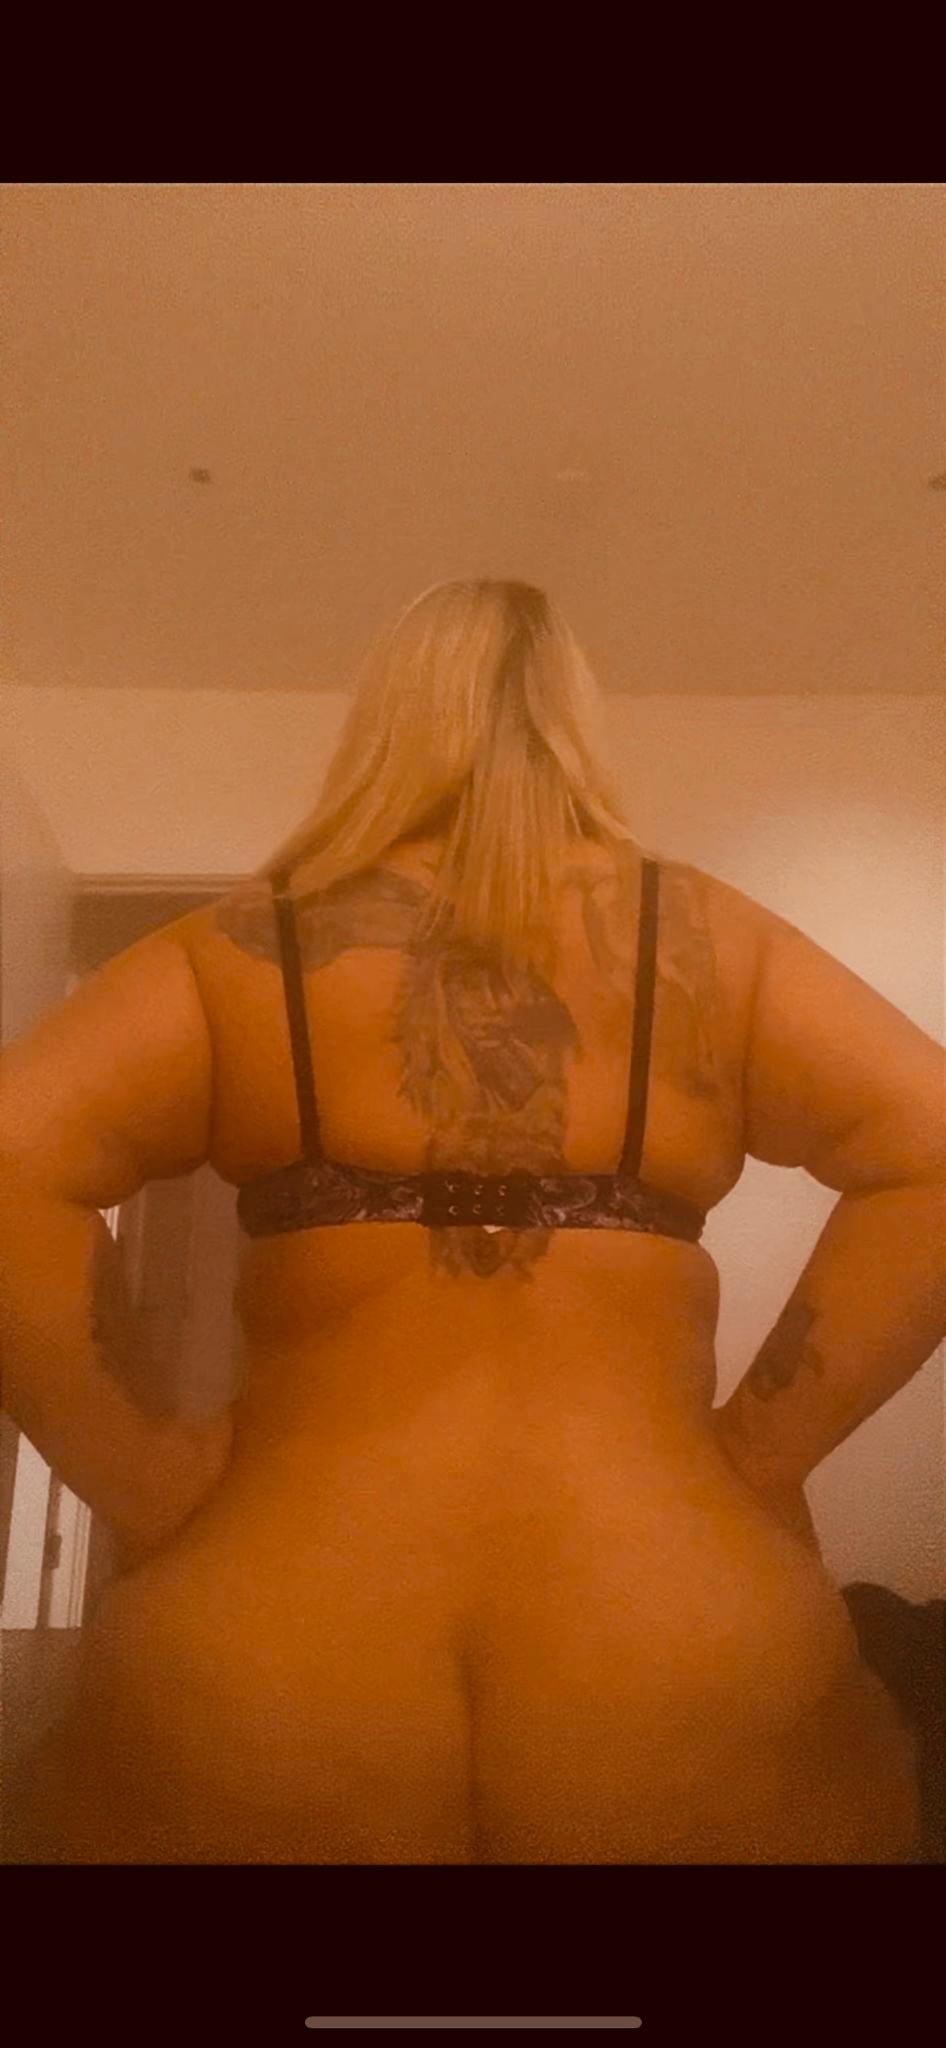 Profile Image for CockHungryMilf on AdultWork.com